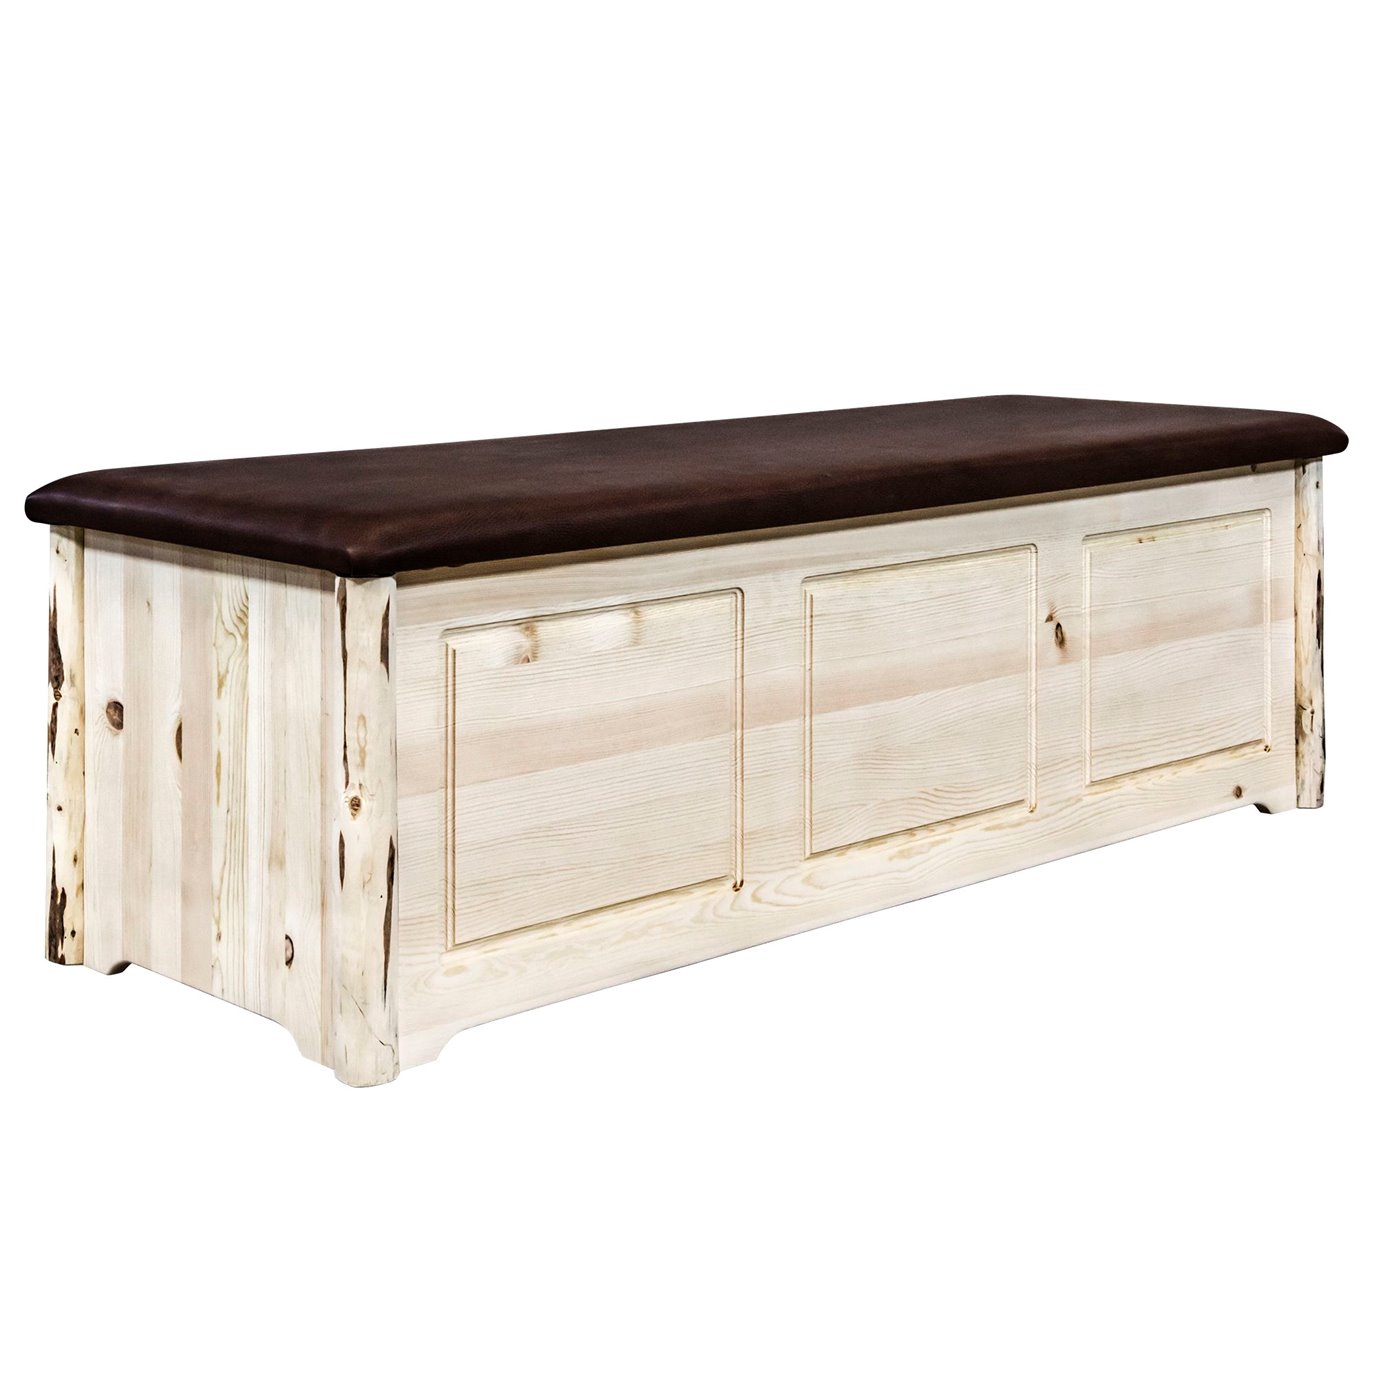 Montana Blanket Chest w/ Saddle Upholstery - Clear Lacquer Finish